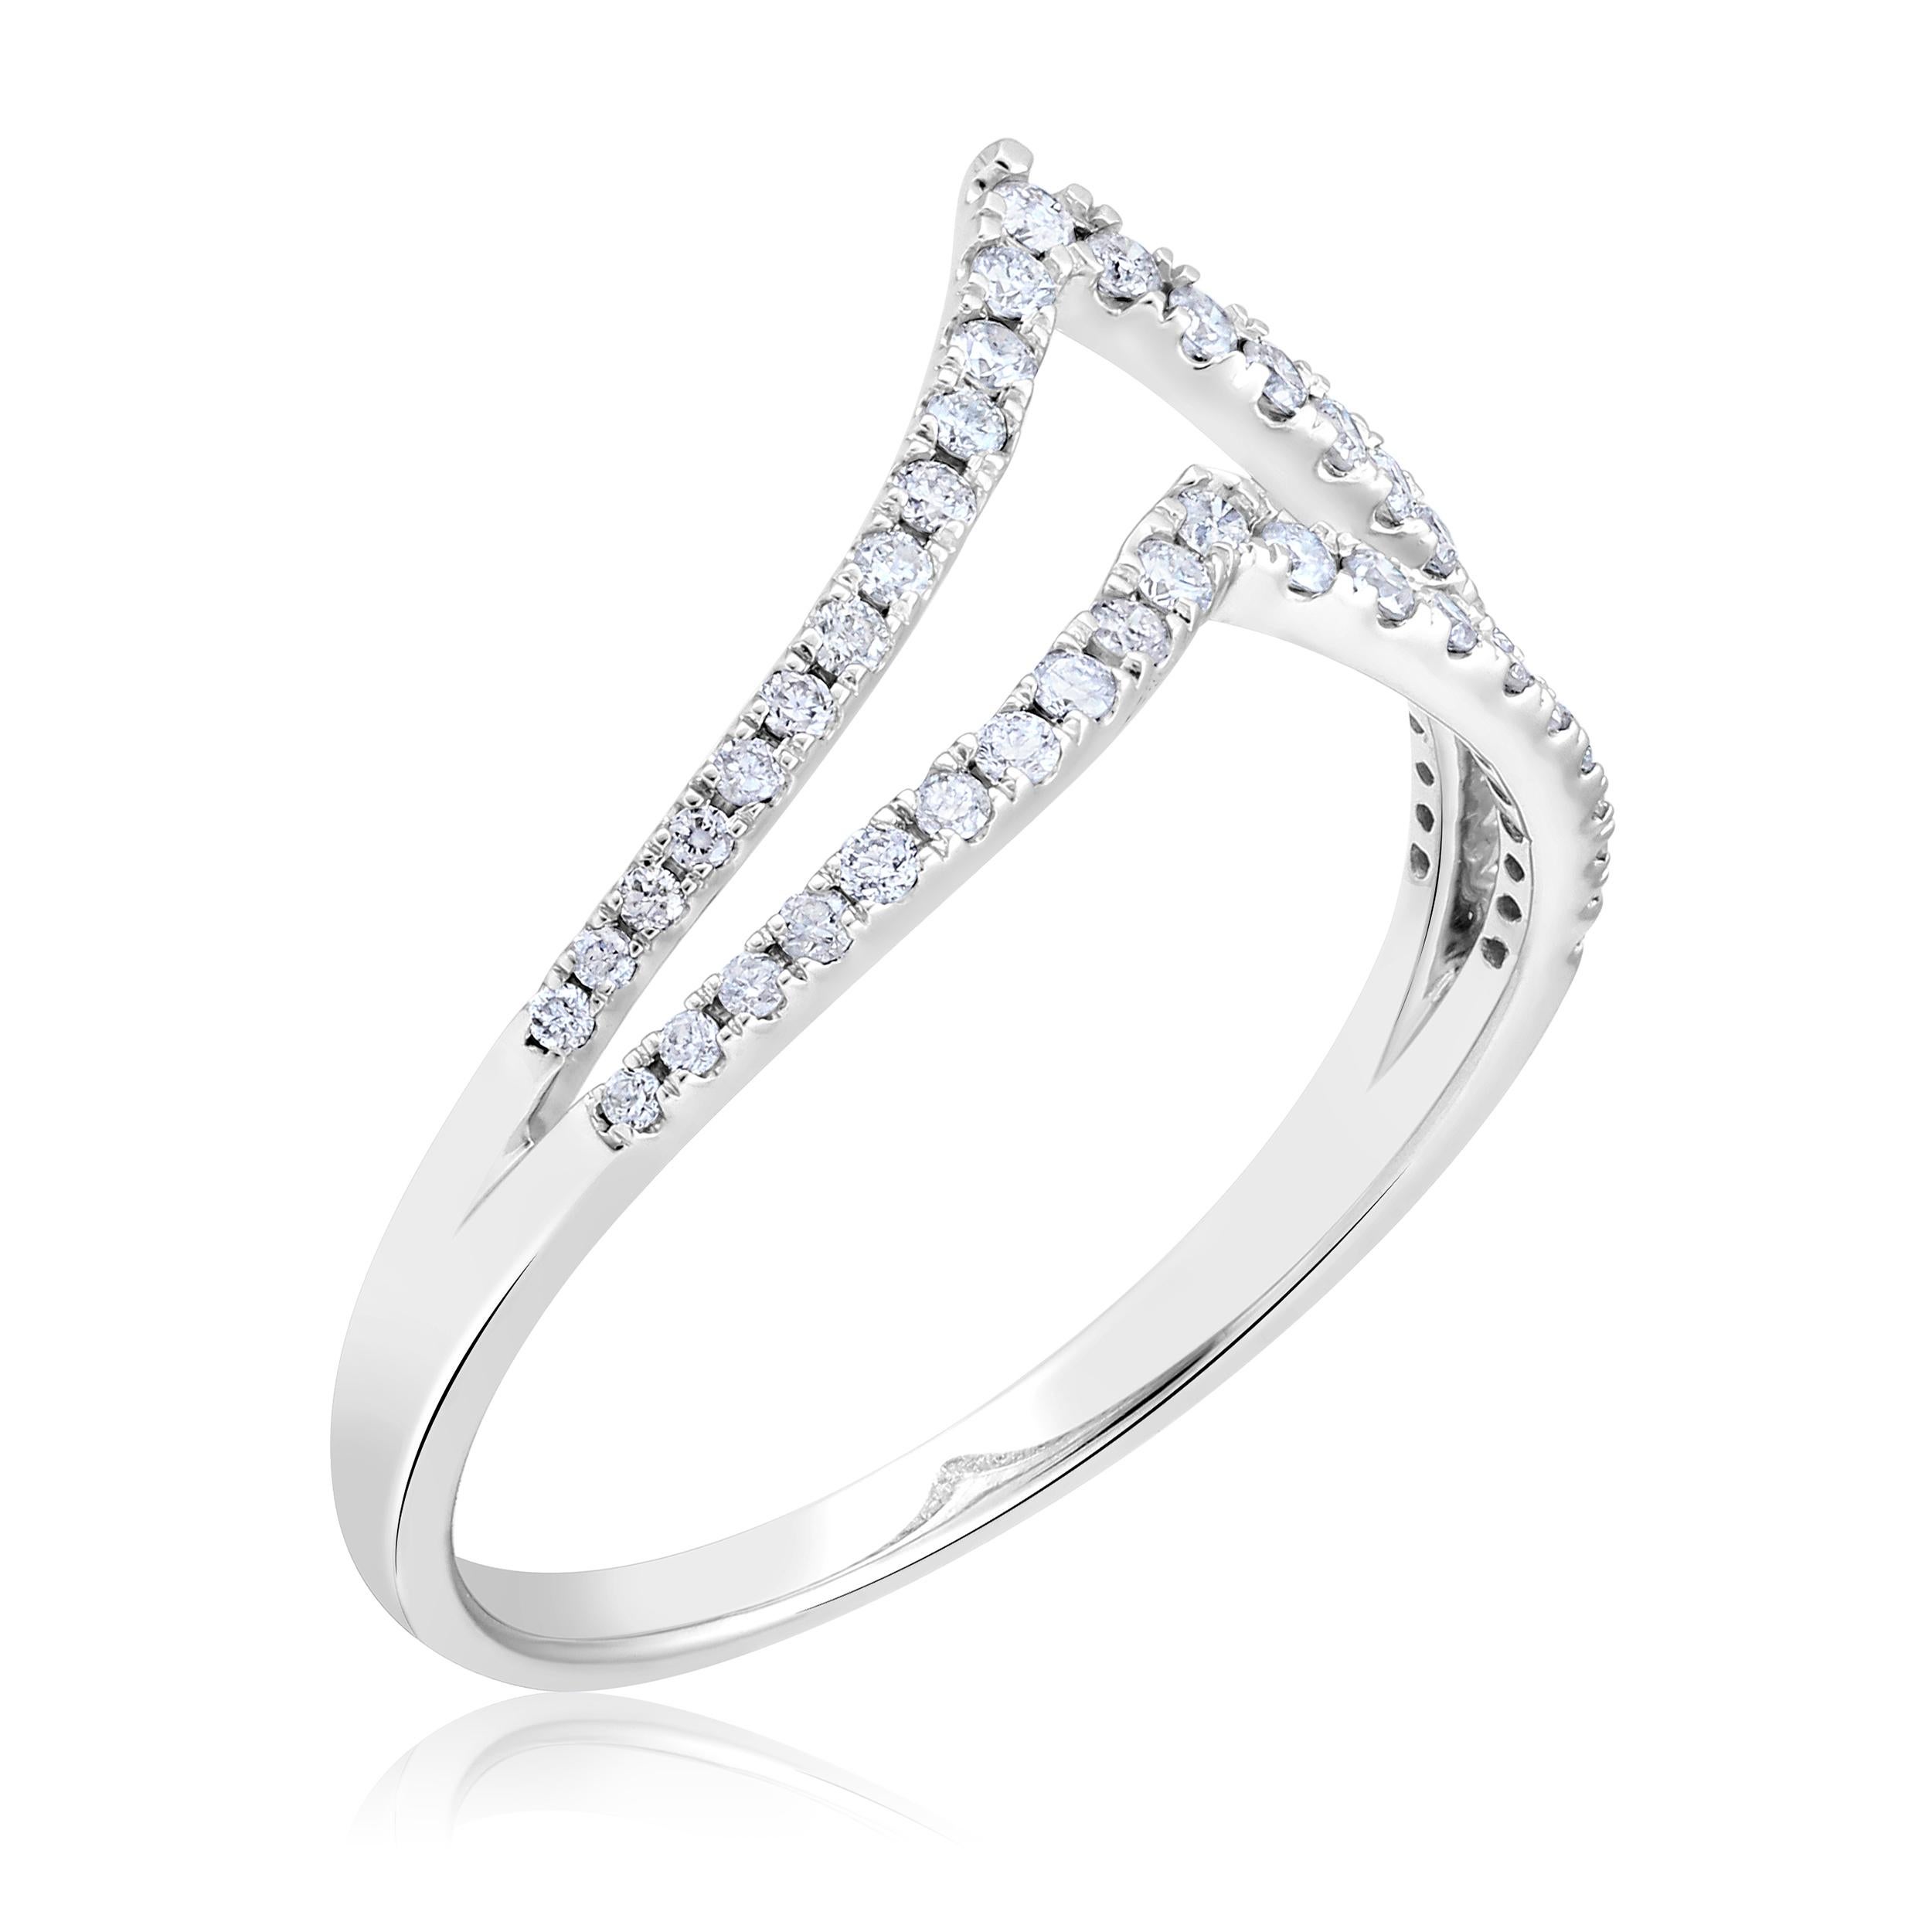 Ring Size: US 7 

Crafted in 1.49 grams of 10K White Gold, the ring contains 47 stones of Round Diamonds with a total of 0.28 carat in F-G color and I1-I2 clarity.

This jewelry piece will be expertly crafted by our skilled artisans upon order.